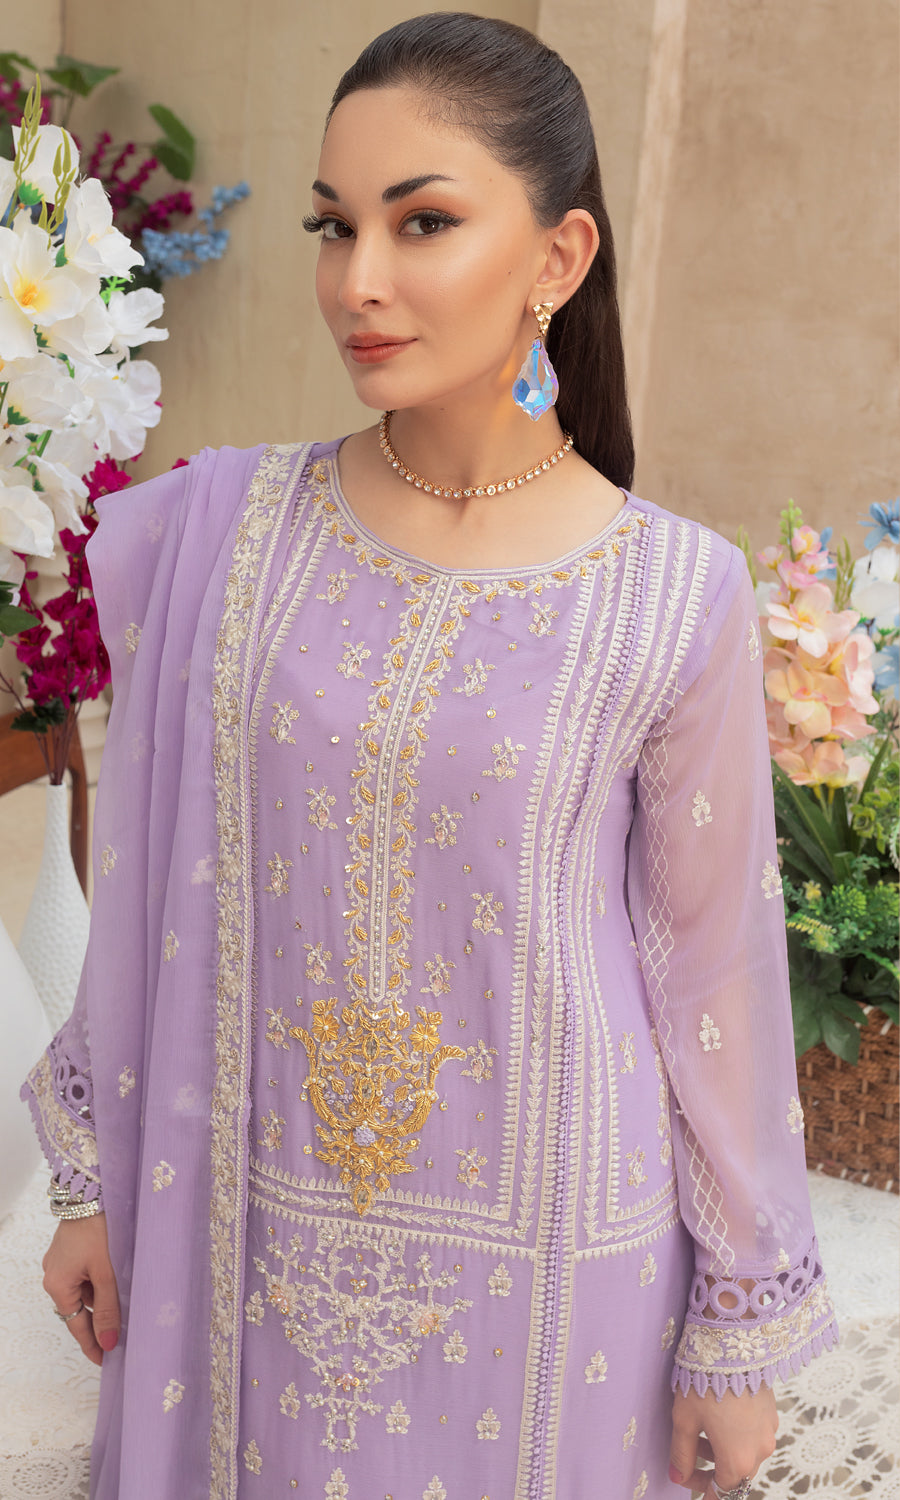 Shamooz. Mushq Volume 3. Step into a world of timeless elegance with this breathtaking vibrant color and embrodiery work on the front and side panel that enhances a pop of color and elevate the design.The delicately hand-embellished with every detail of this outfit exudes sophistication and refinement.